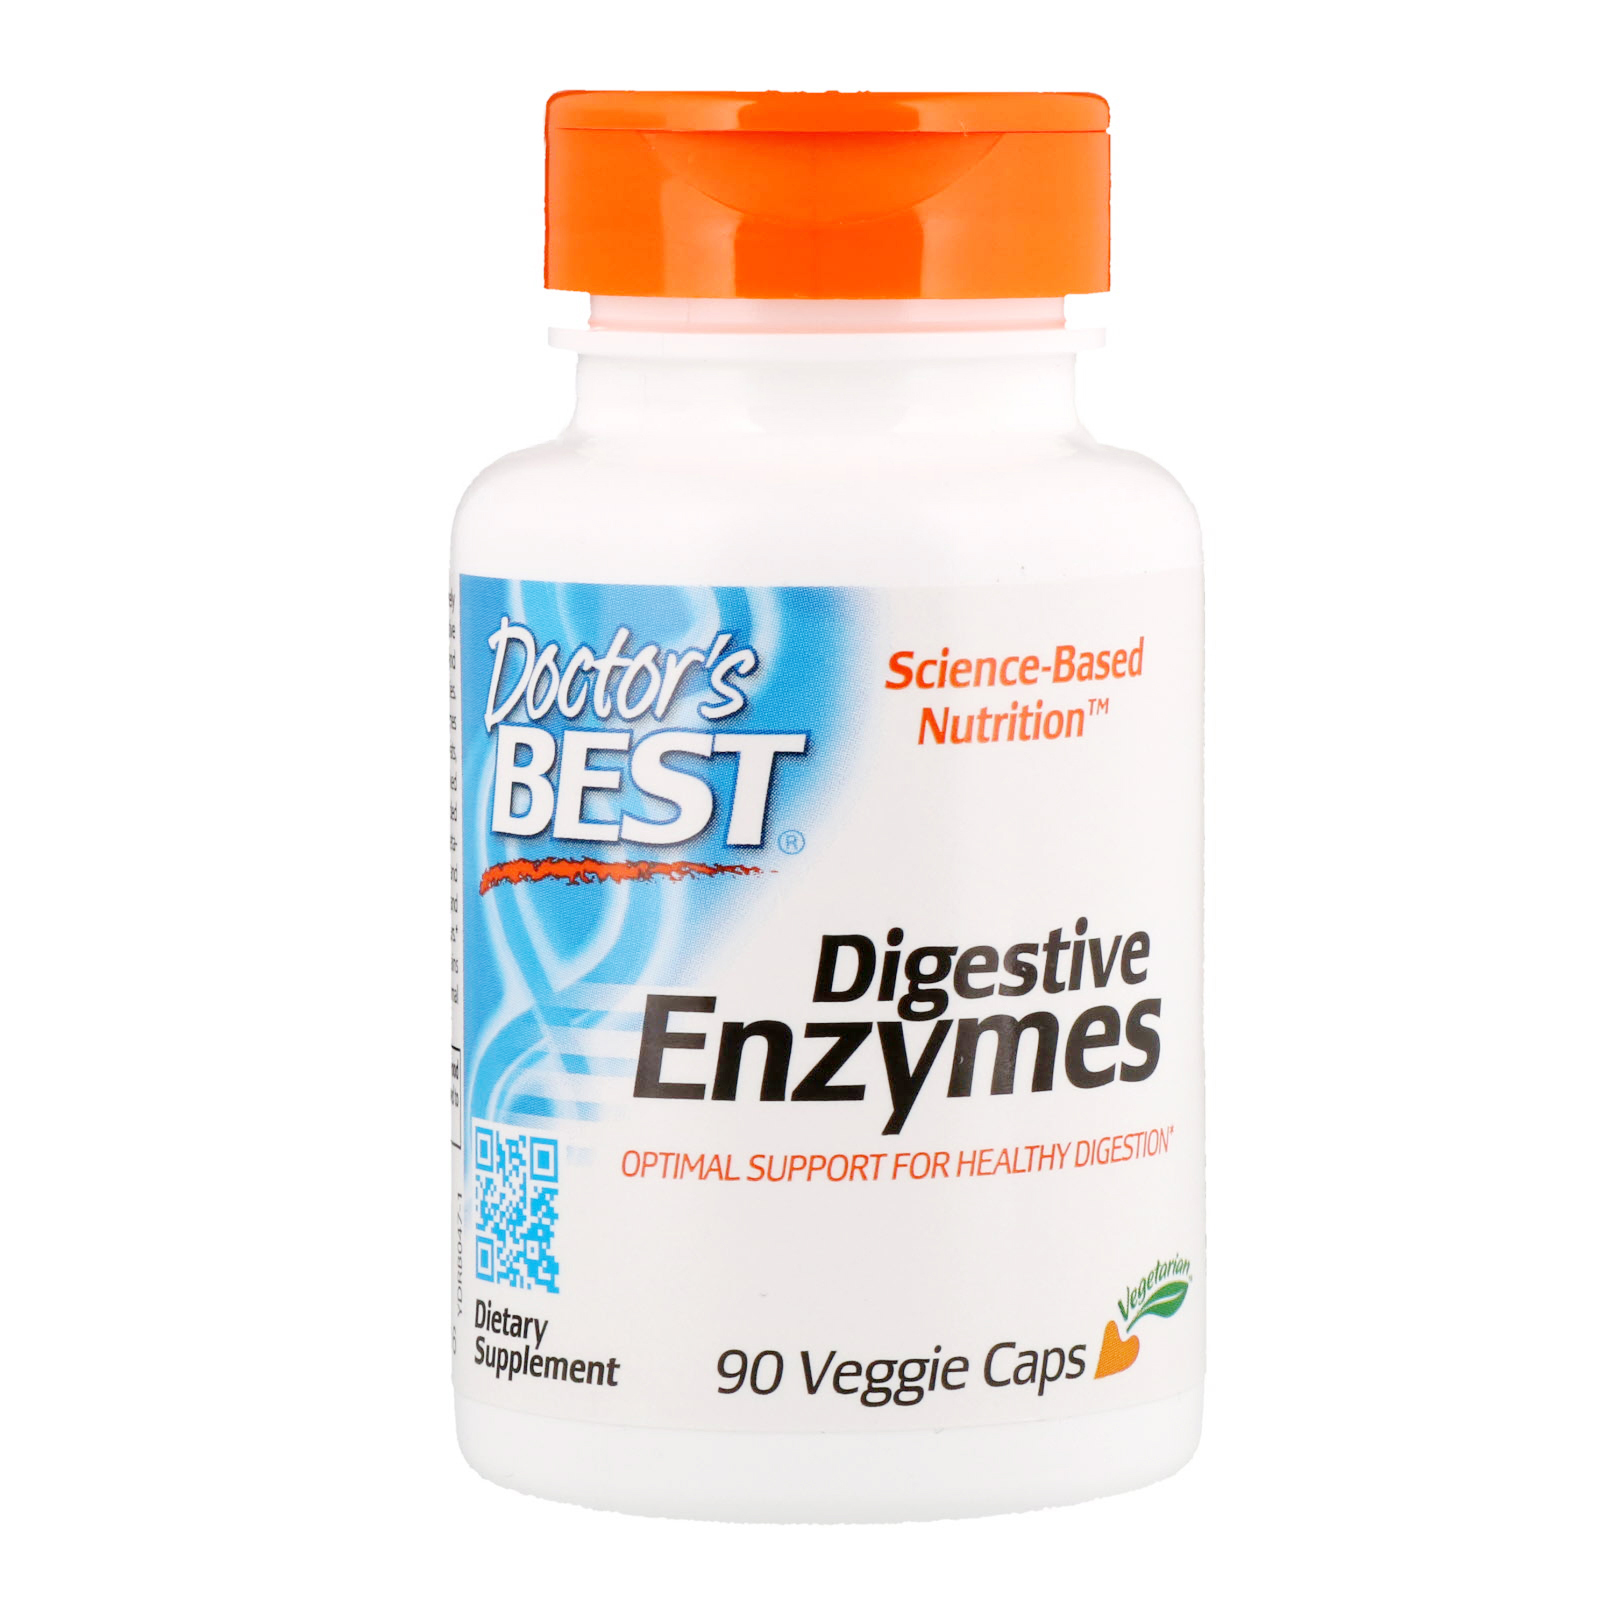 What Is The Best Digestive Enzyme Supplement - Digestive Enzyme Supplement With Hydrochloric Acid